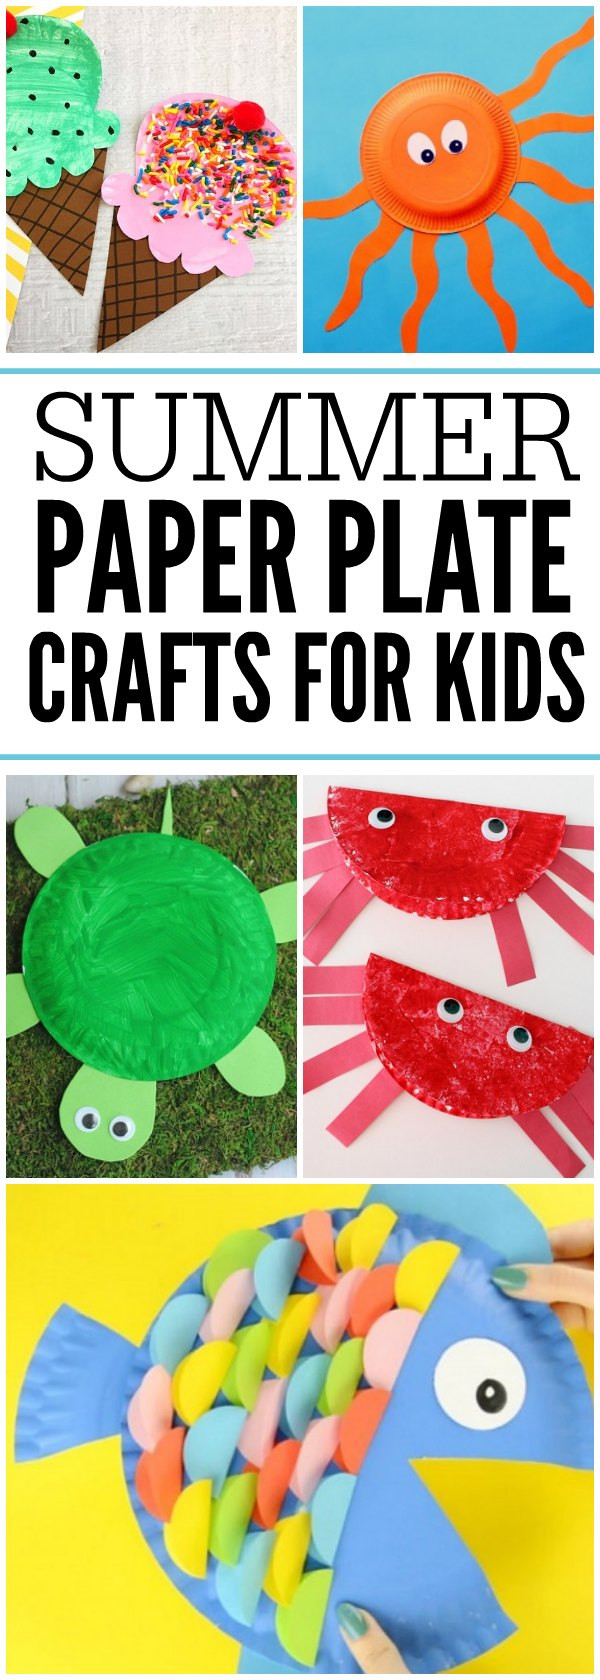 Fun Summer Crafts For Kids
 Easy Summer Paper Plate Crafts for Kids Plates make great